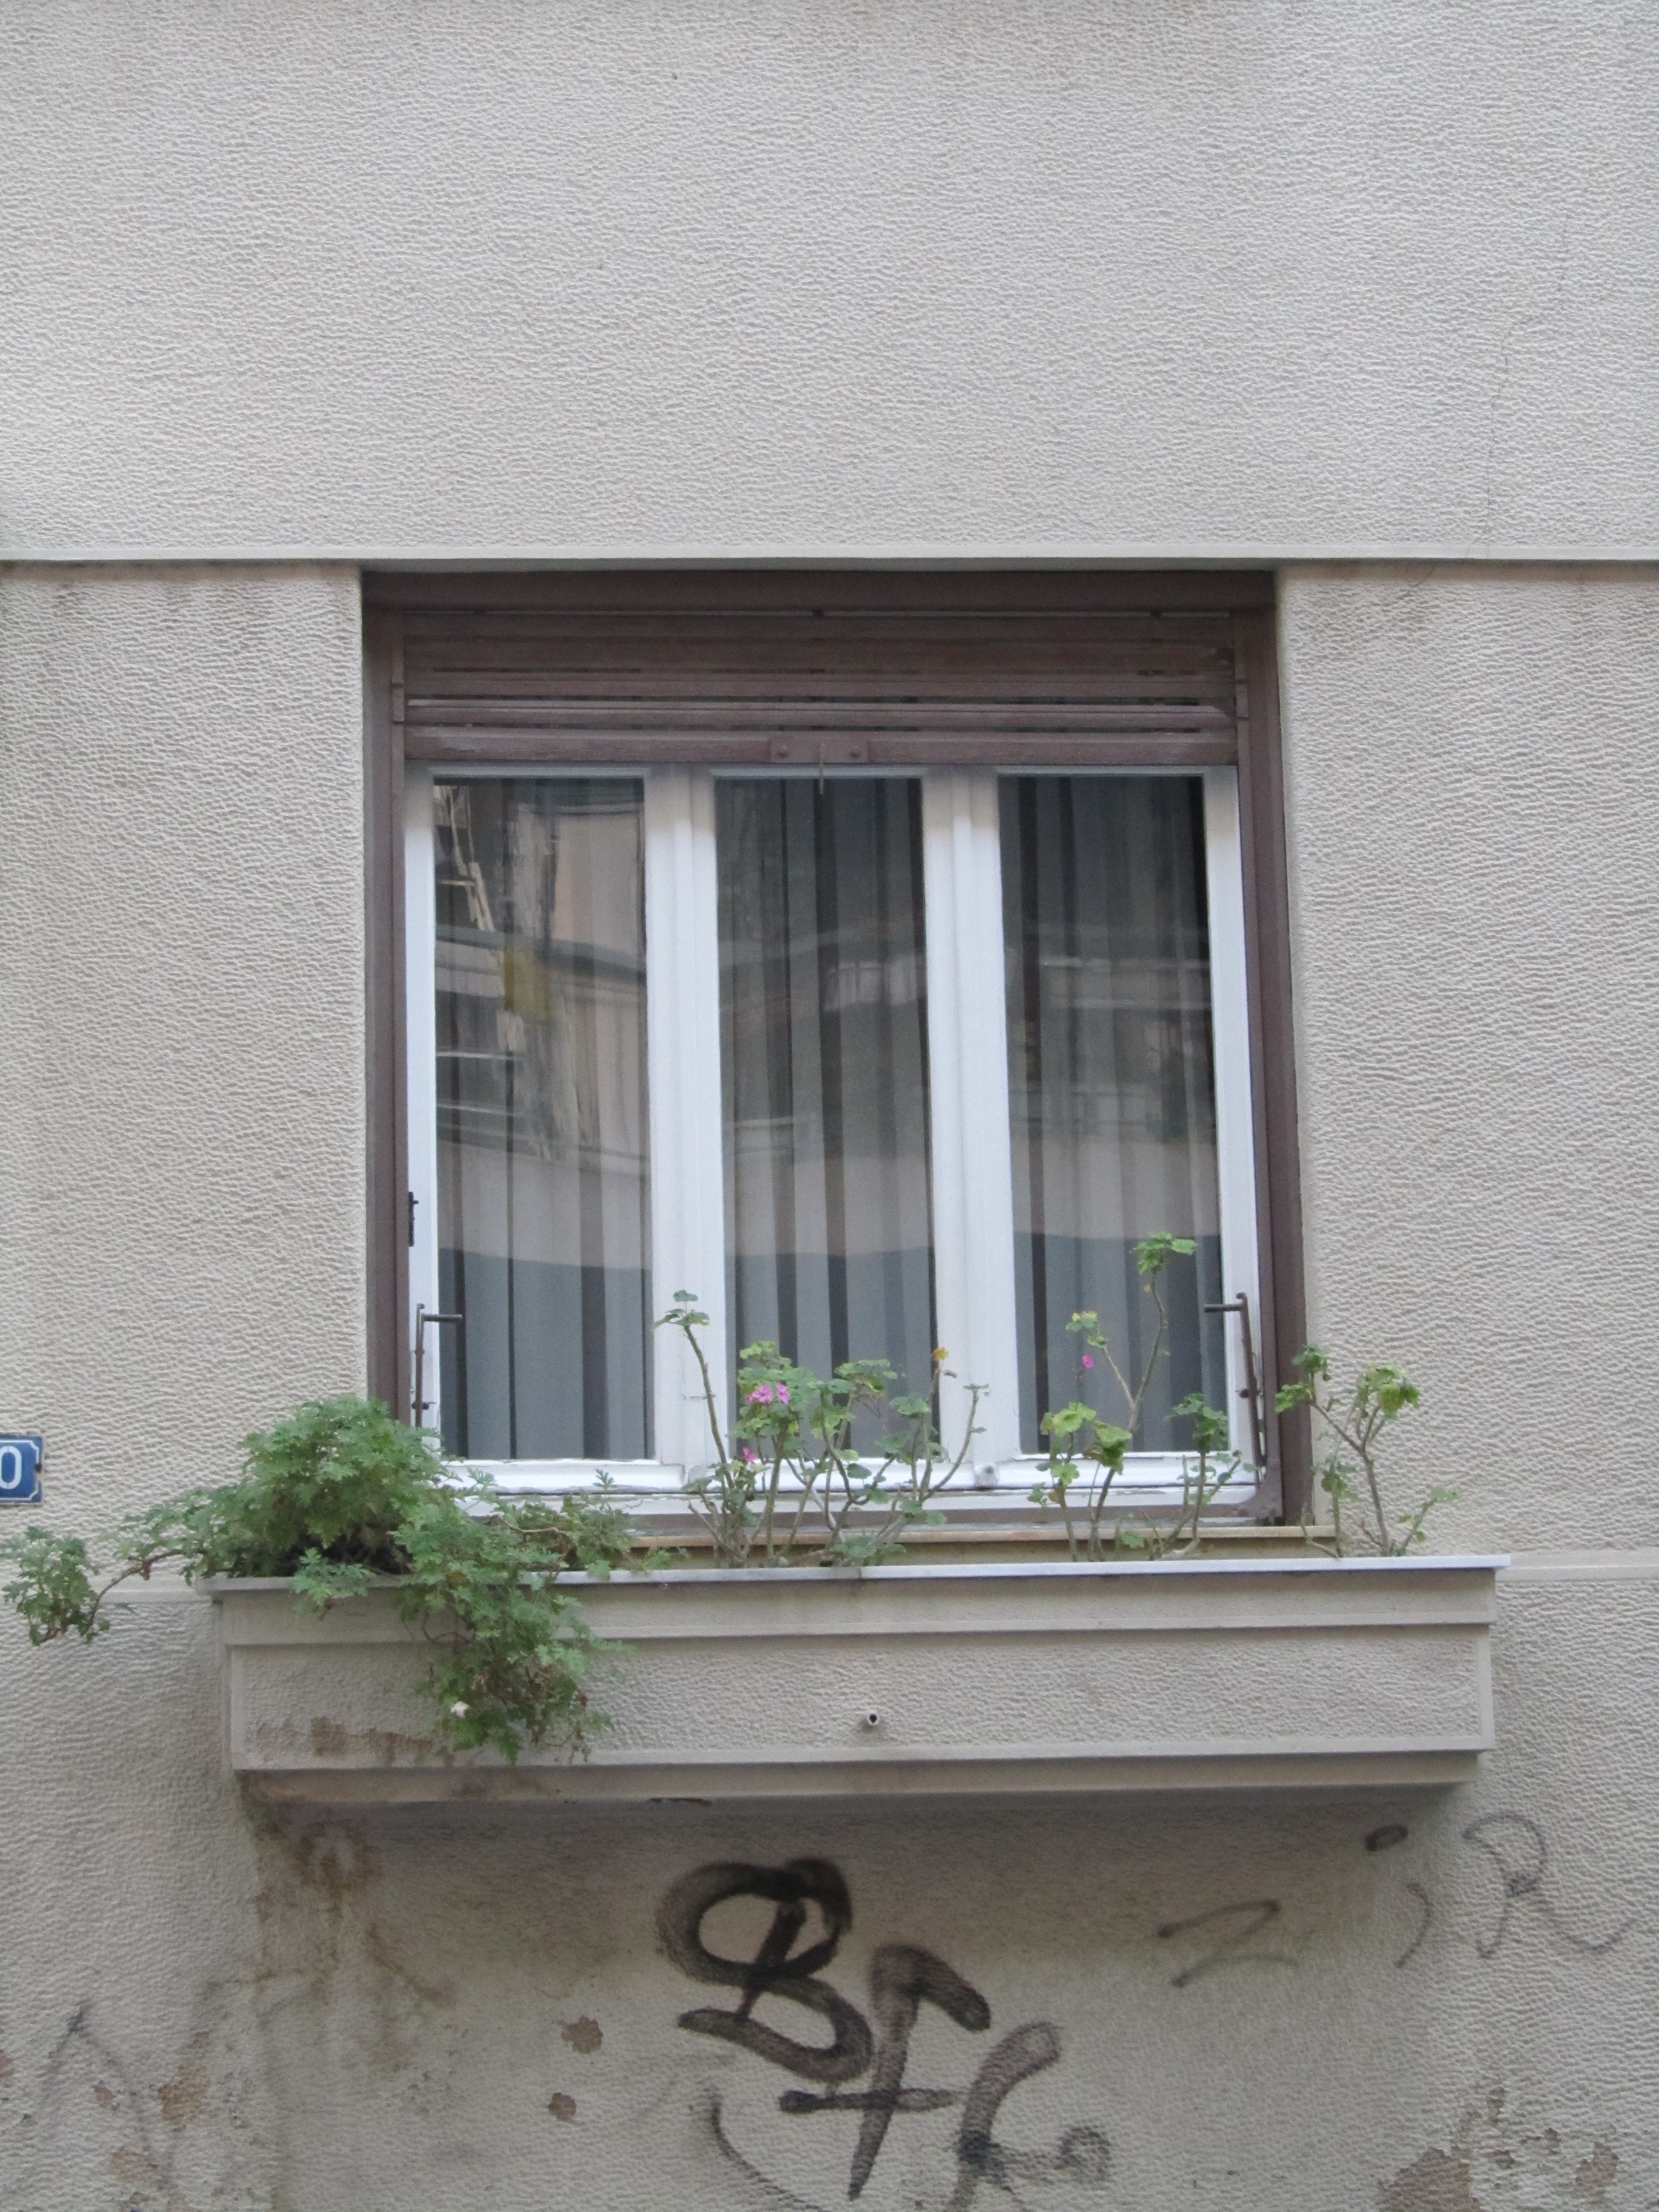 General view of the window (2013)